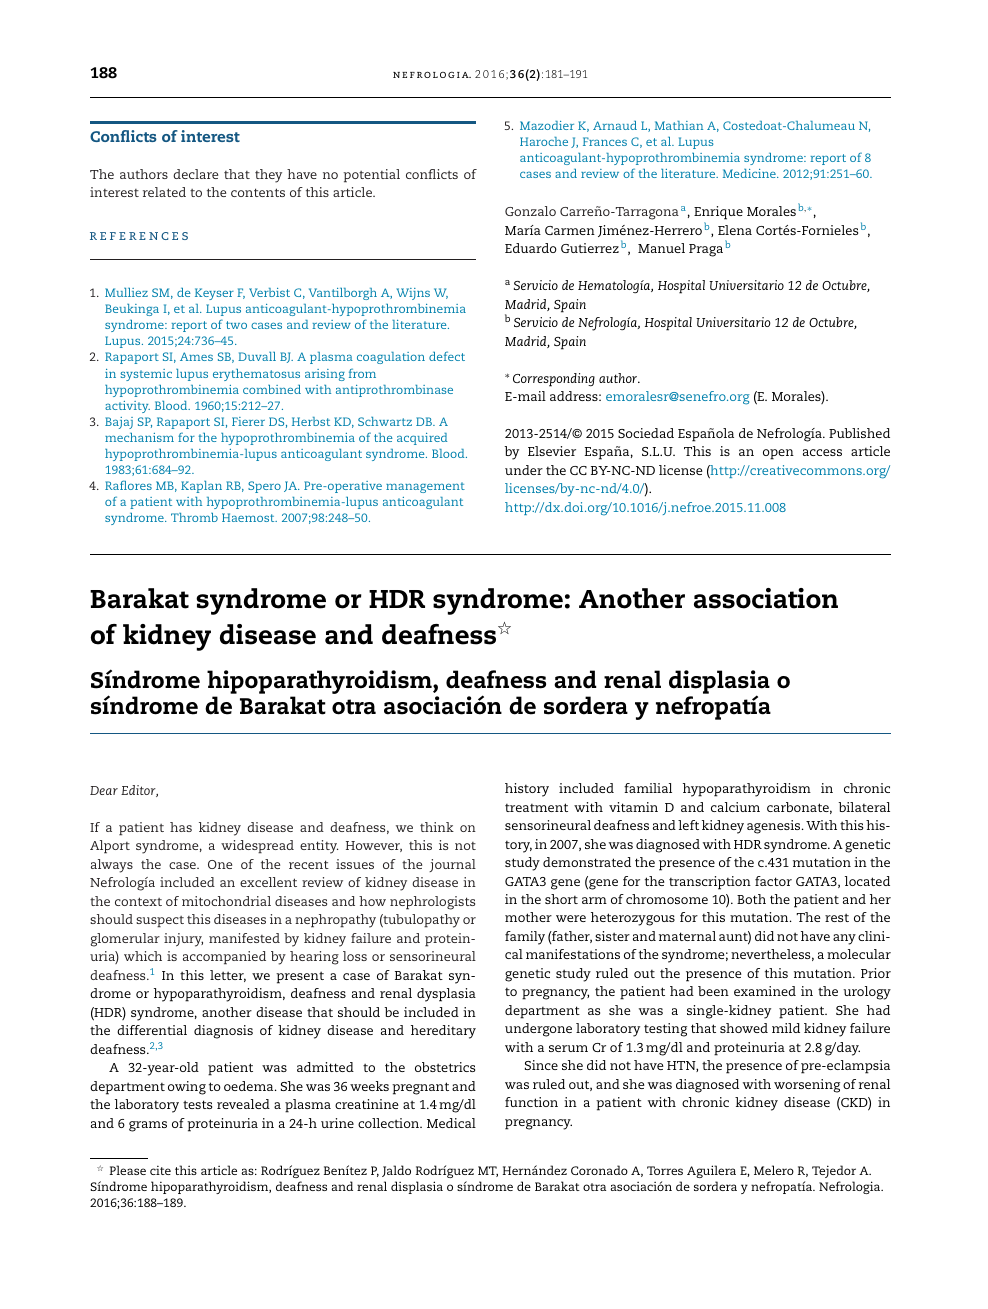 Barakat Syndrome Or Hdr Syndrome Another Association Of Kidney Disease And Deafness Topic Of Research Paper In Clinical Medicine Download Scholarly Article Pdf And Read For Free On Cyberleninka Open Science